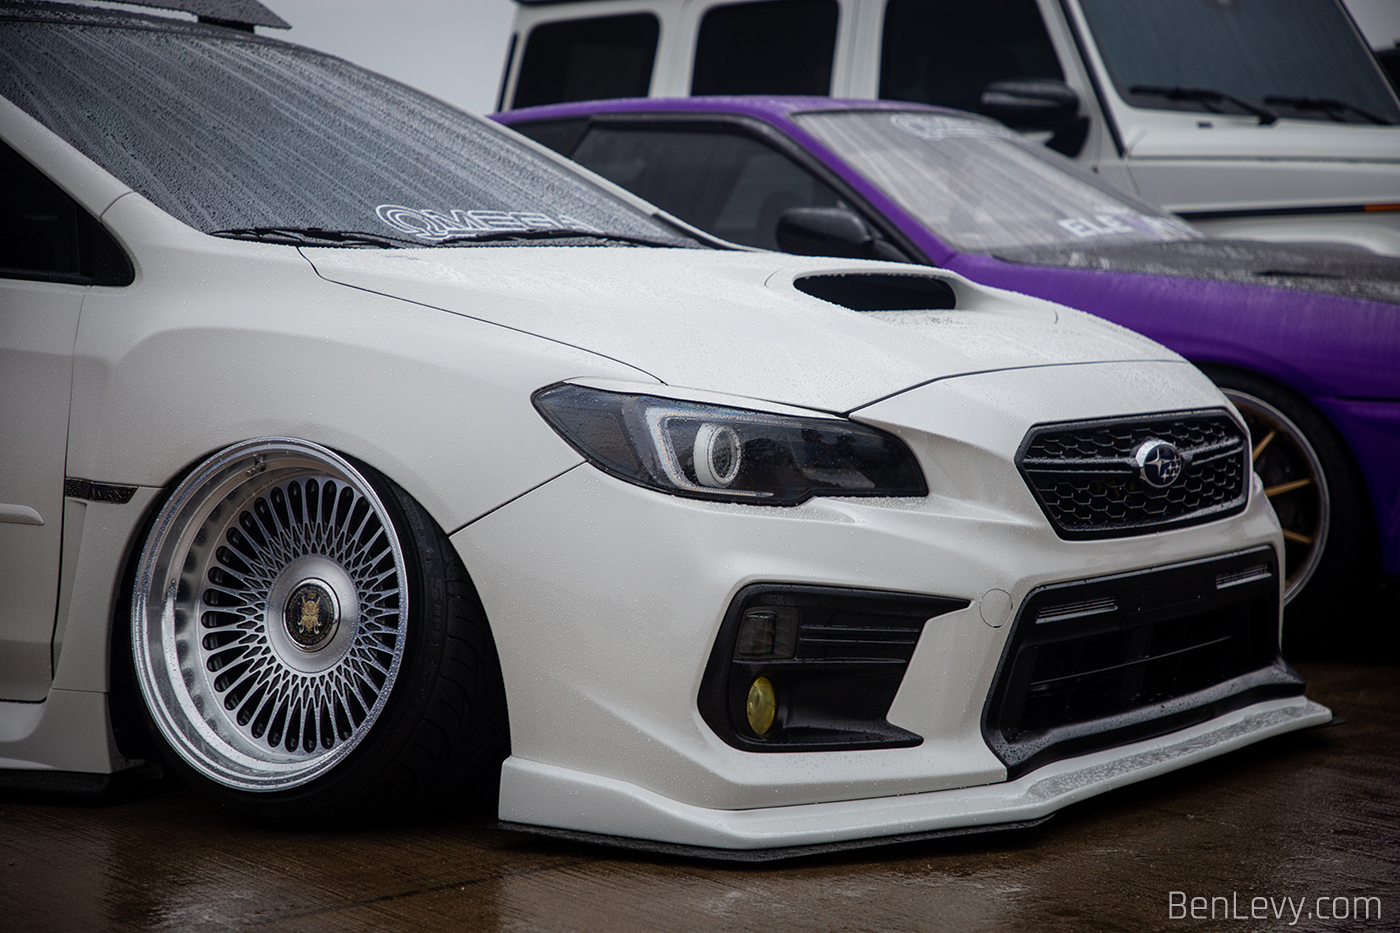 Tasteful Mods on the front of a White Subaru WRX